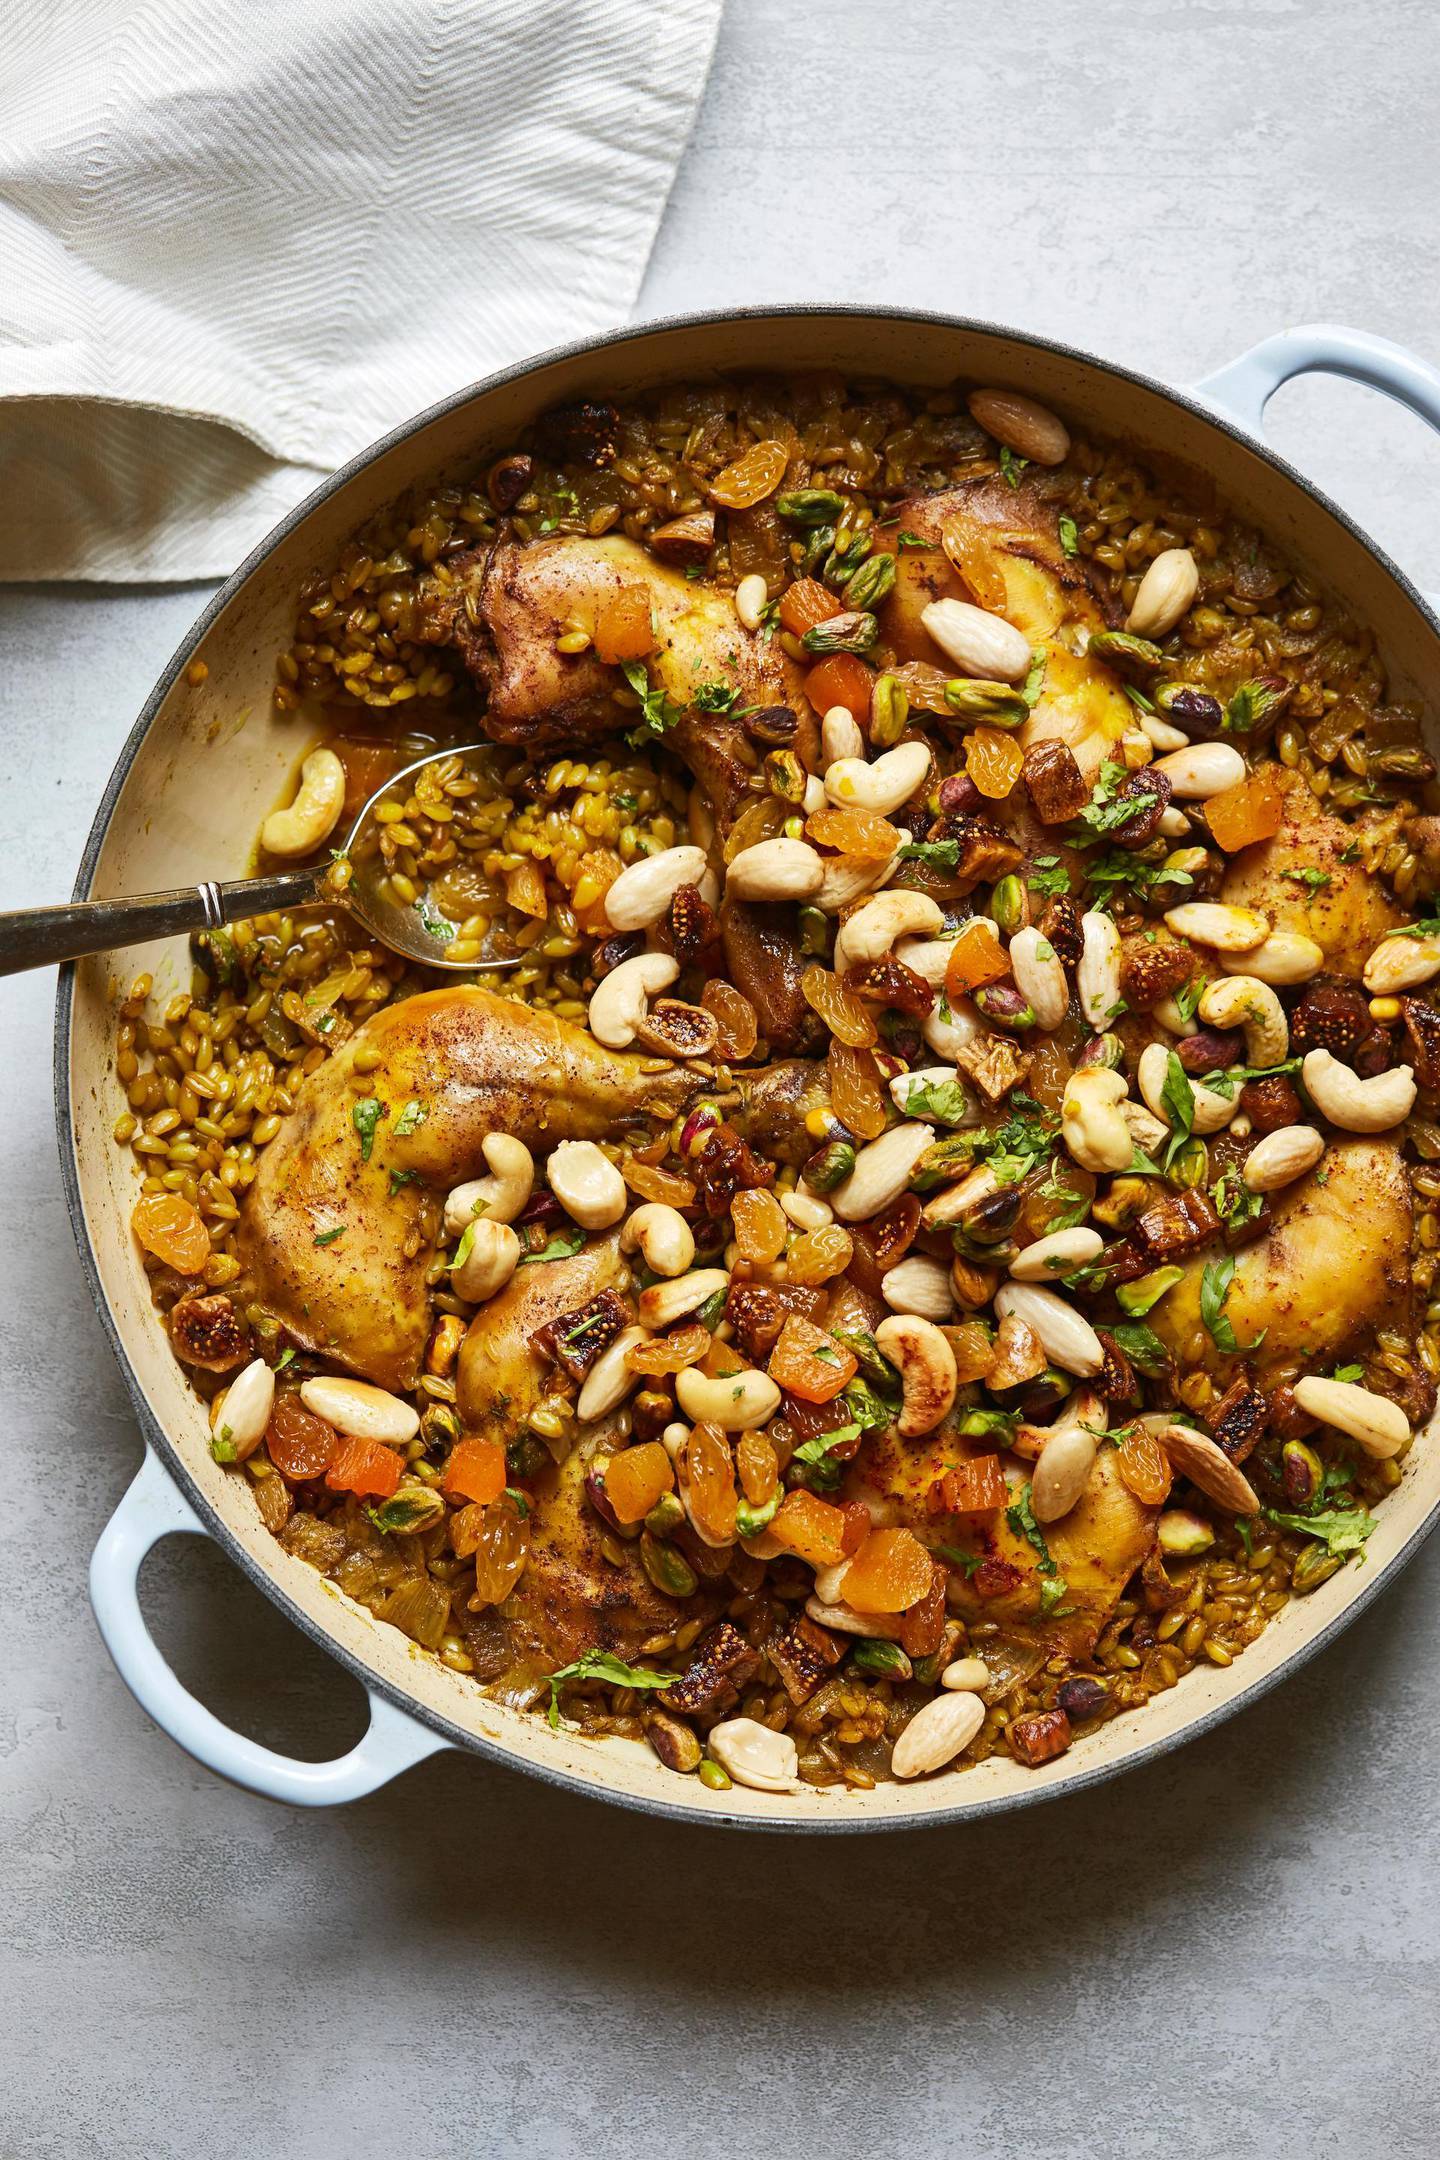 Saffron chicken with freekeh from Cooking with Zahra